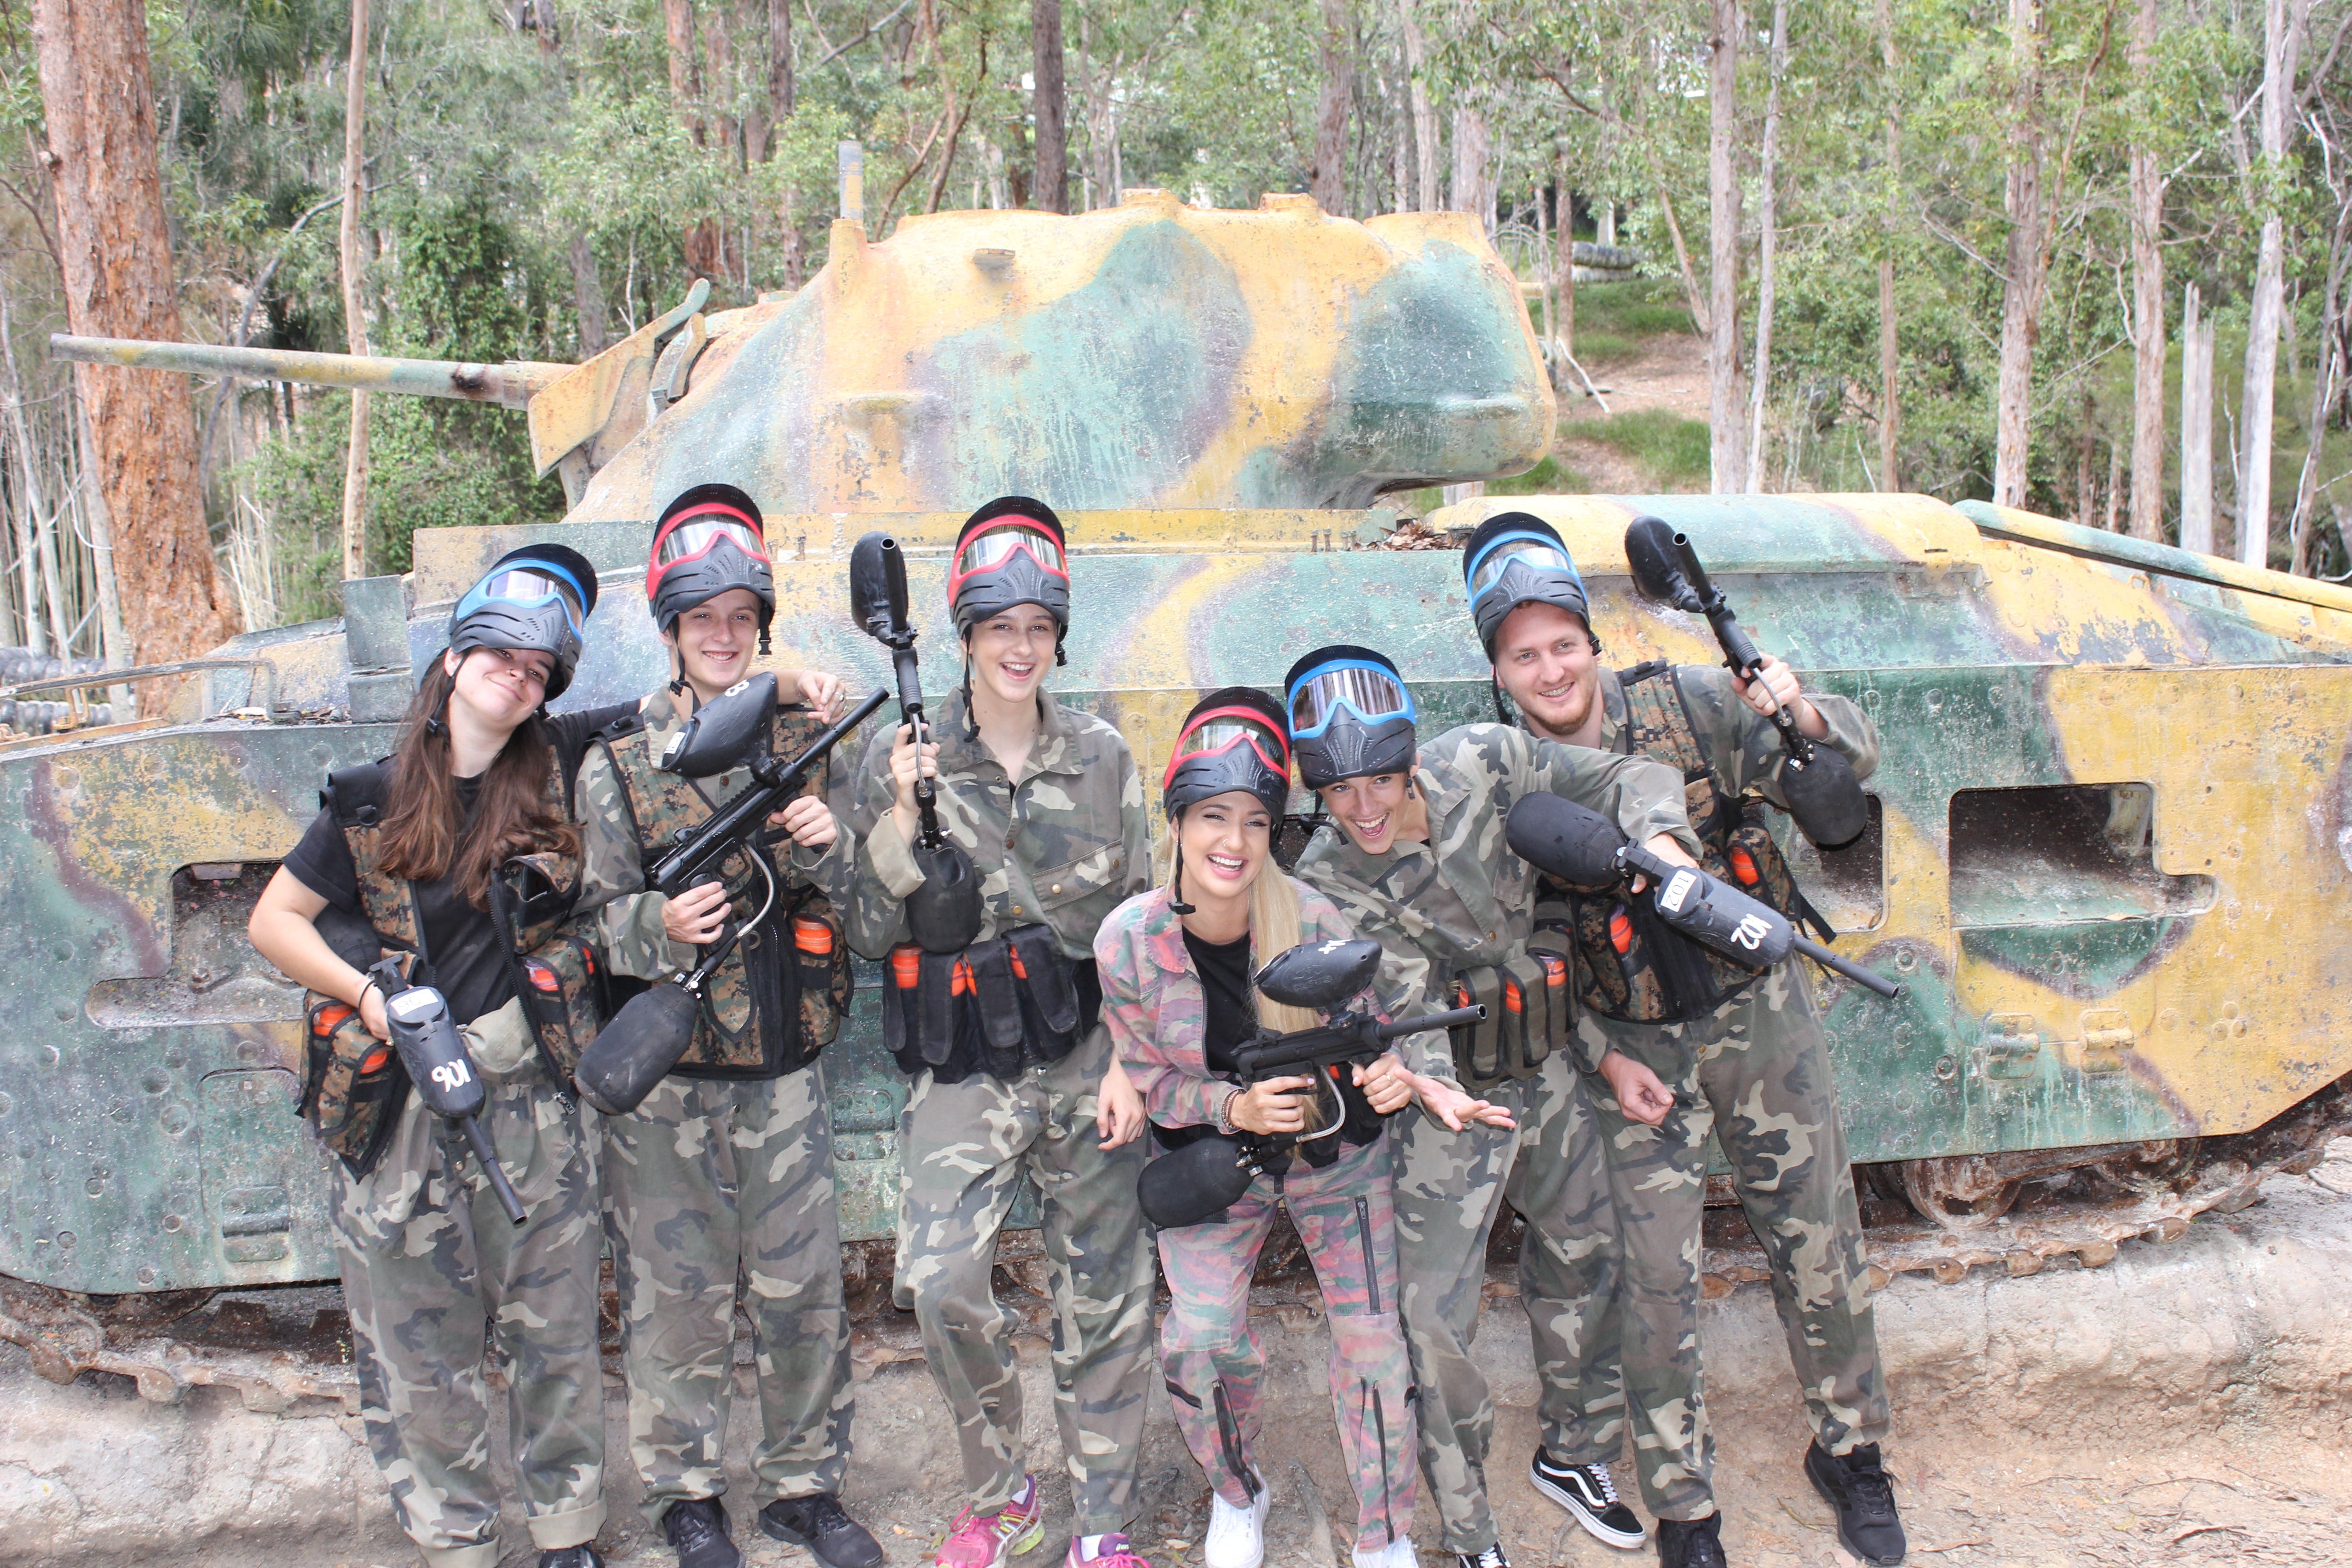 Skirmish Gold Coast - Attractions Melbourne